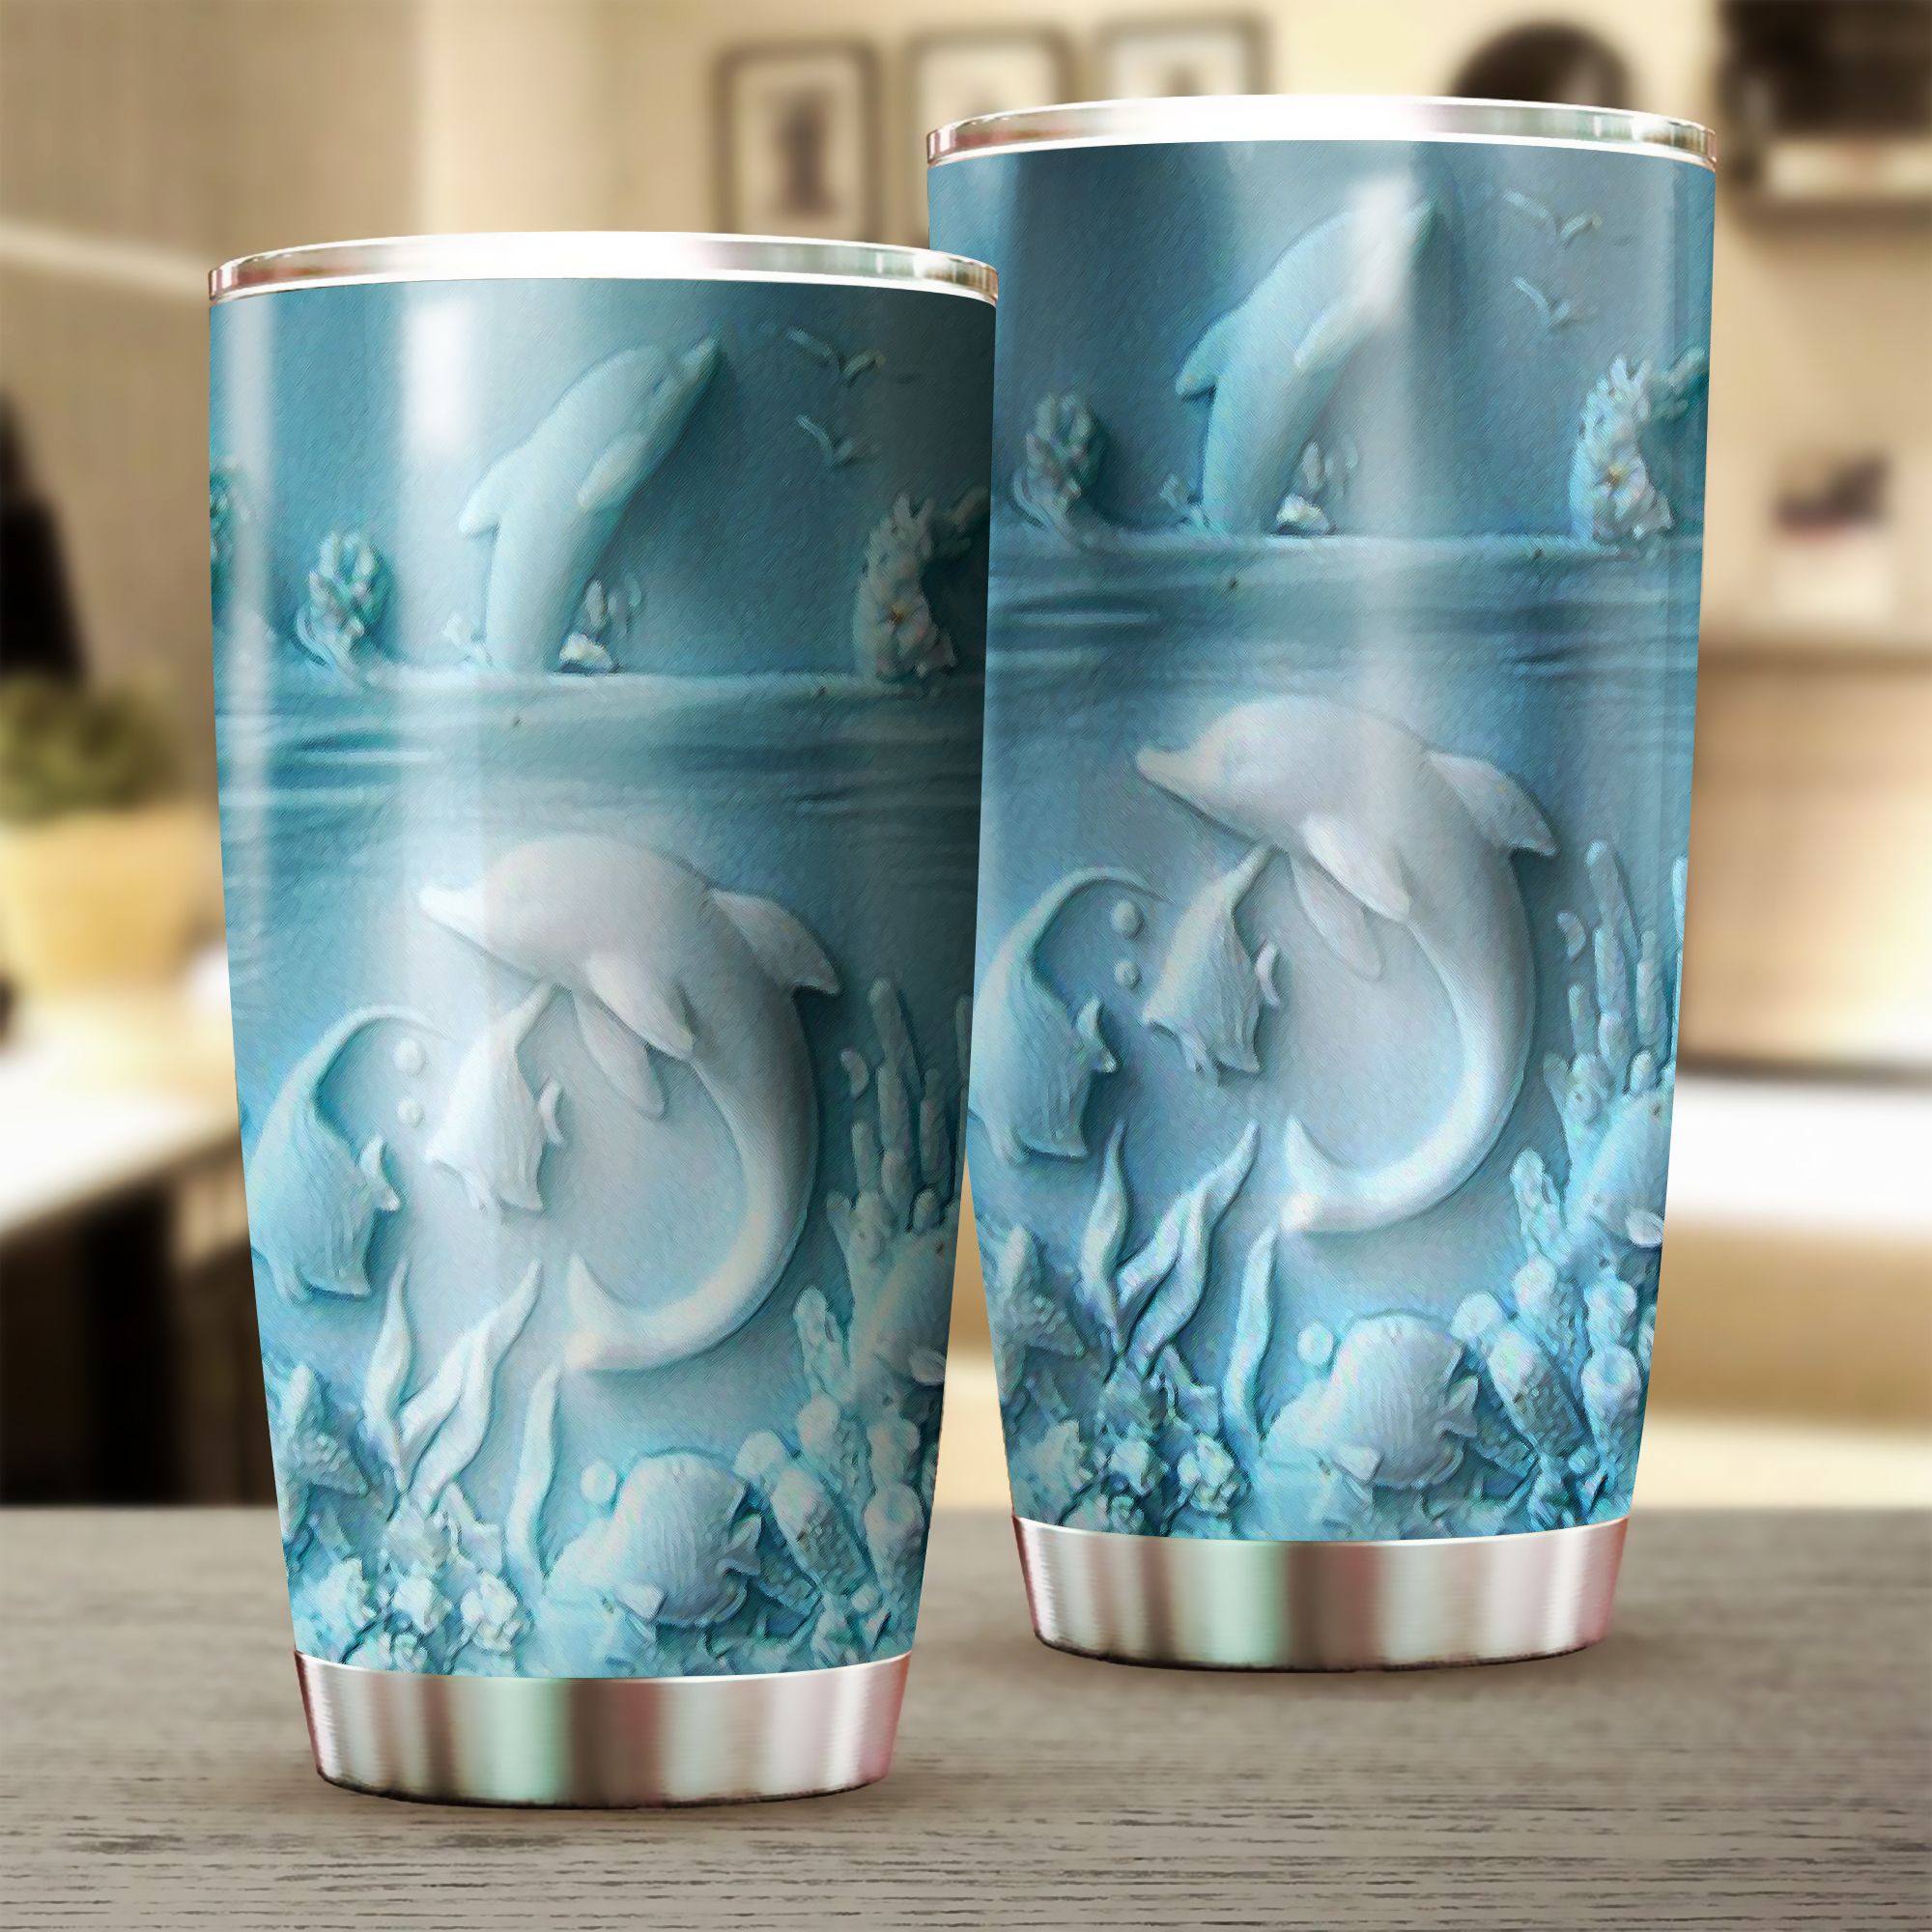 Dolphins 3D Printed Teal Tumbler